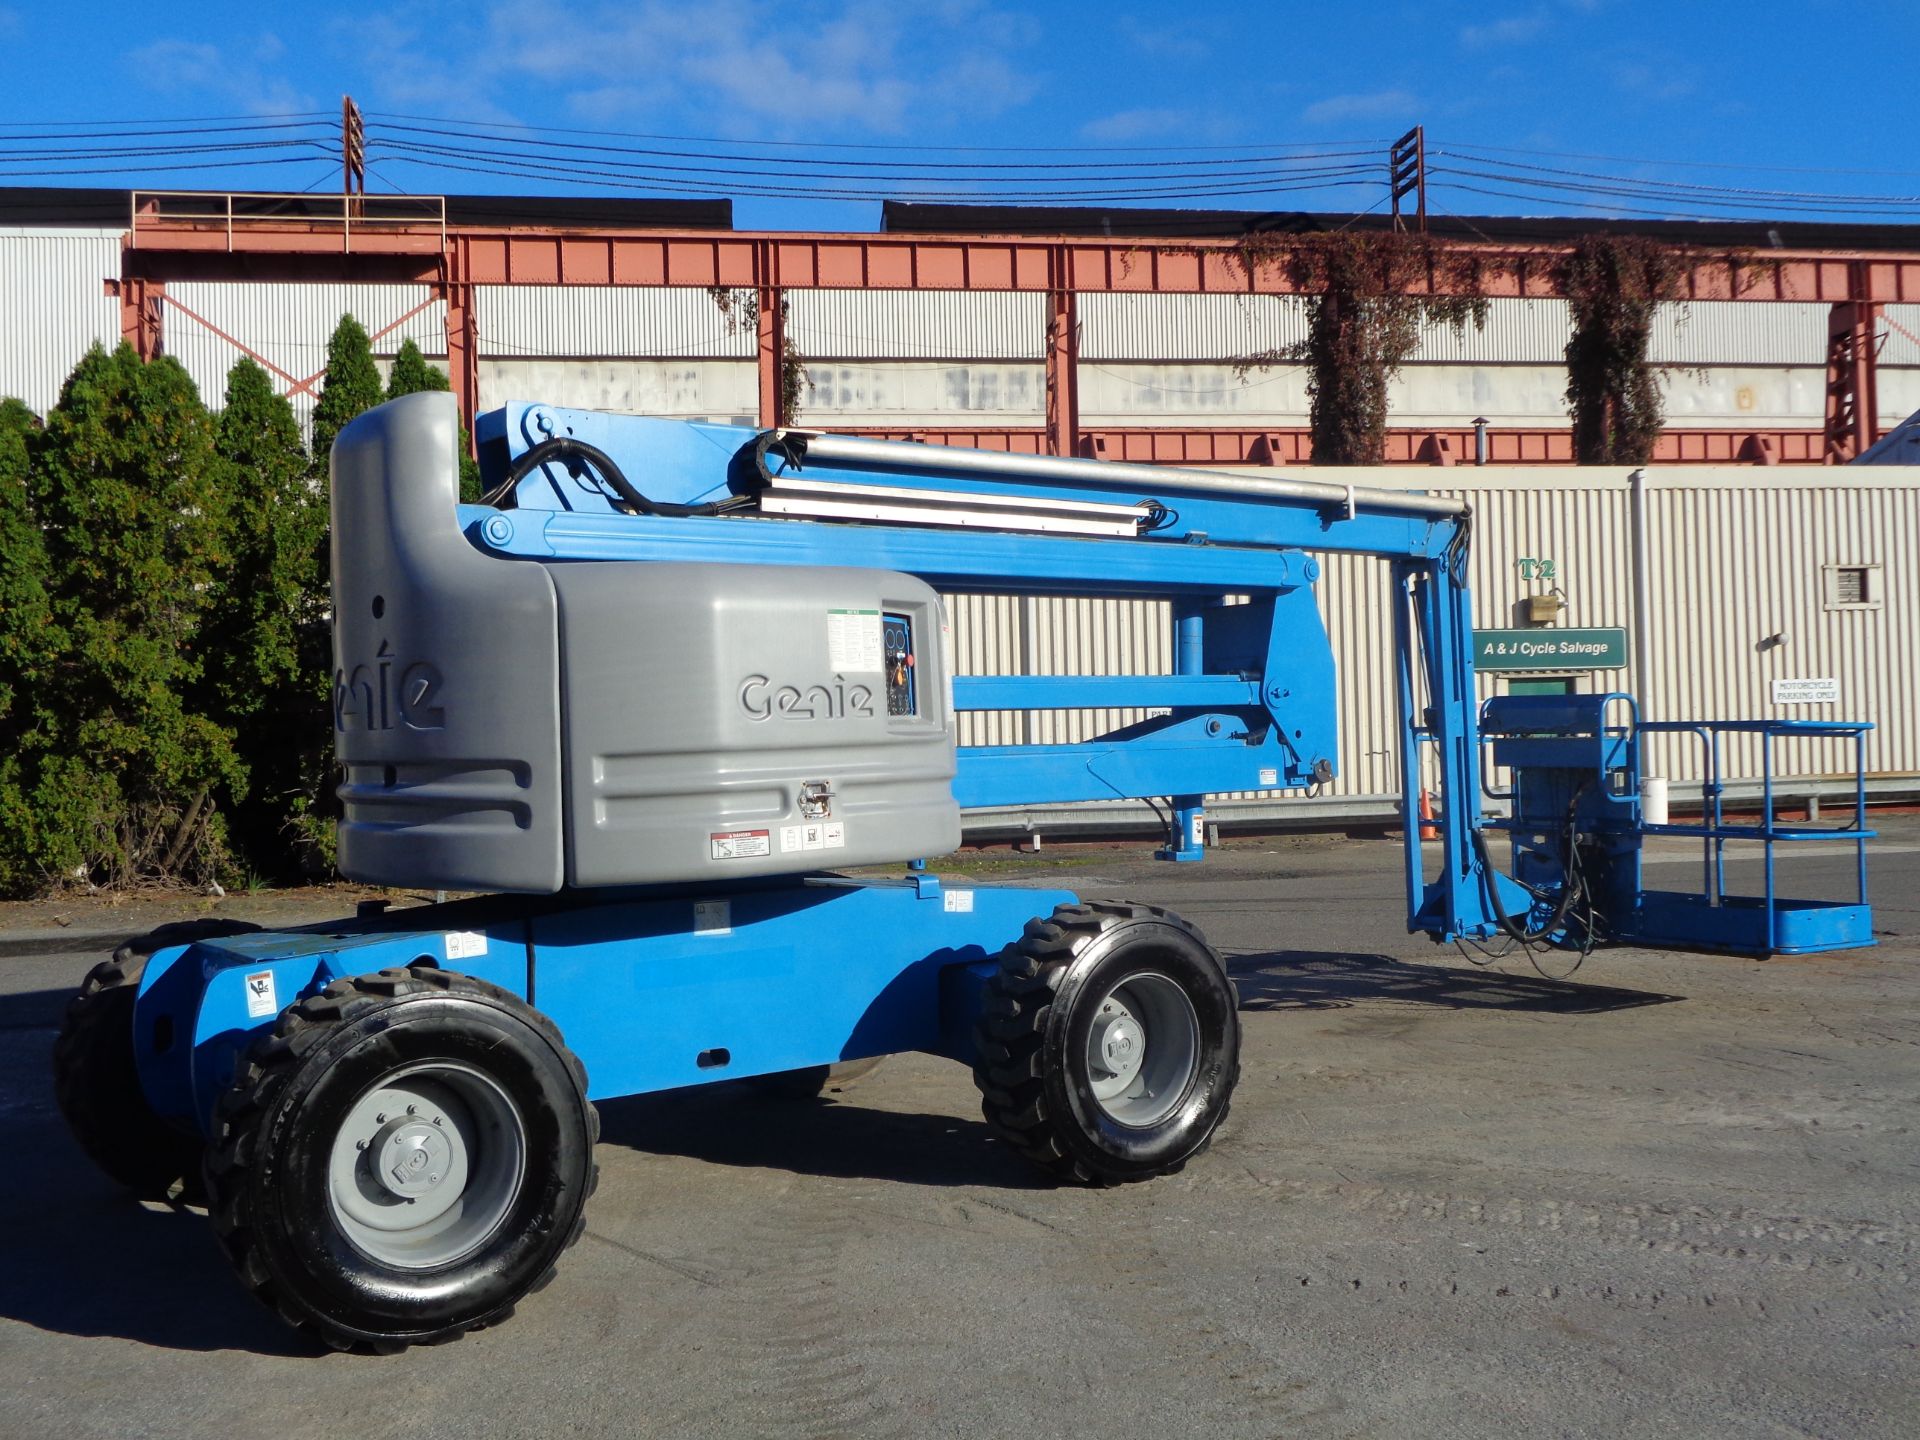 Genie Z60/34- Boom Man Aerial Lift - 4X4 - 60Ft Height - Image 9 of 18